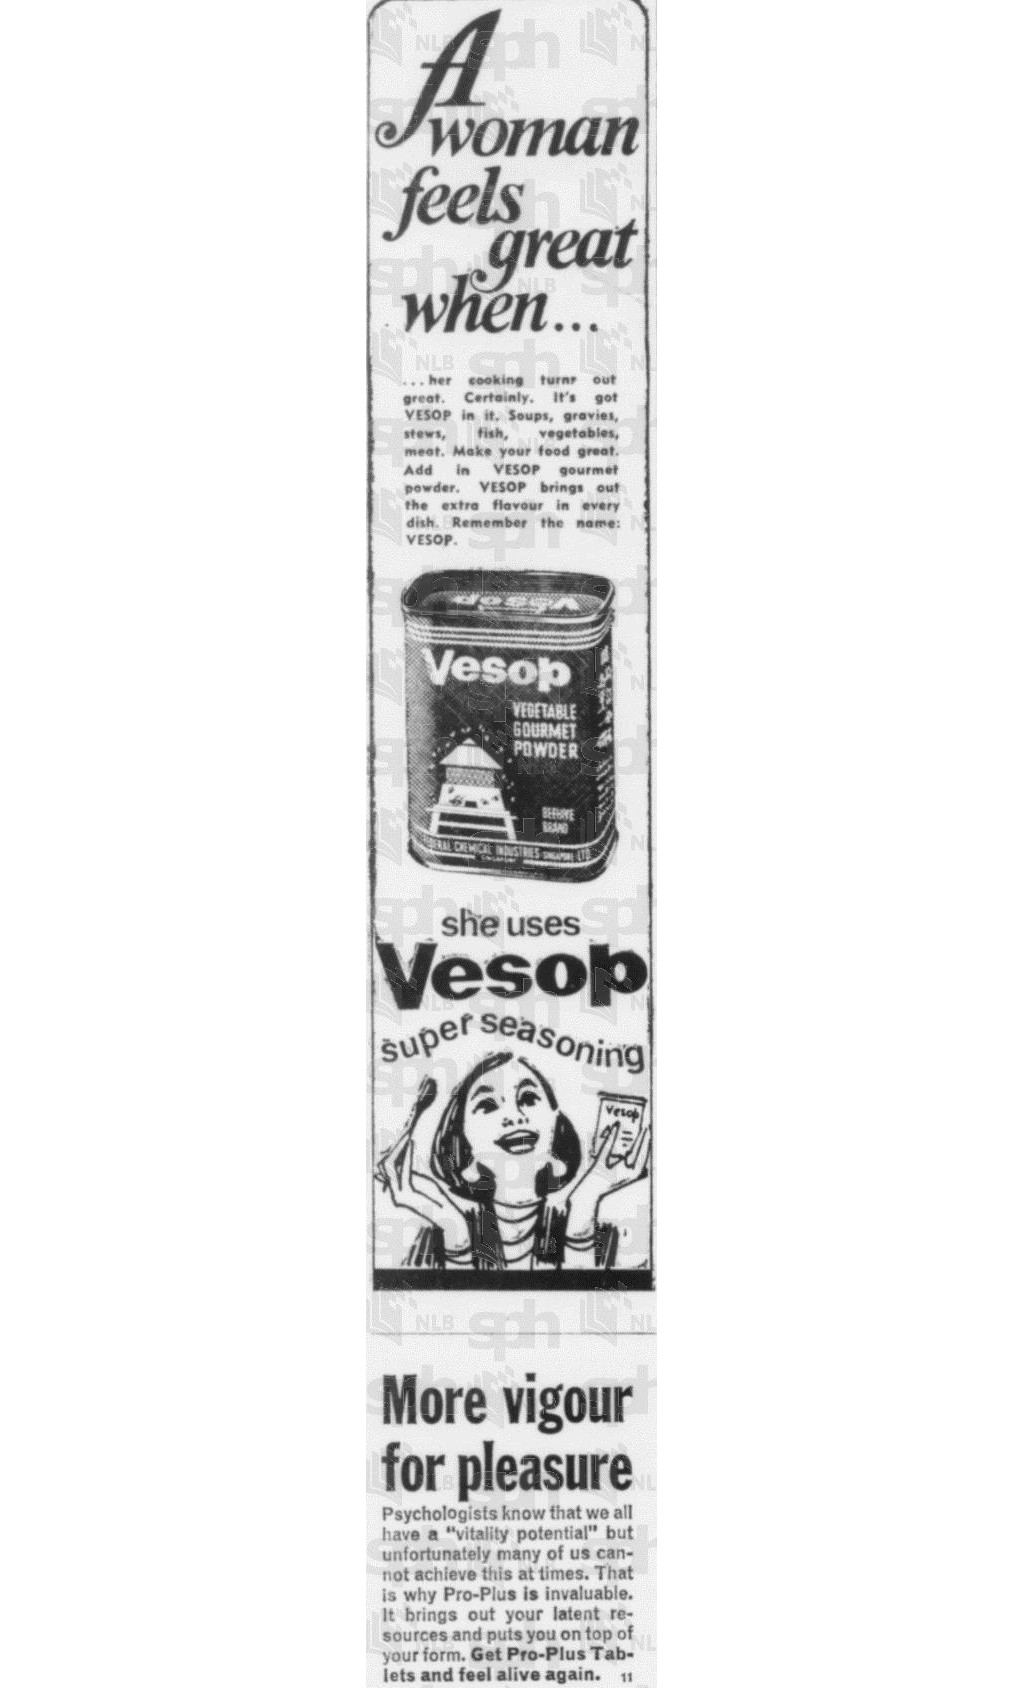 Ad for Vesop from the 60's